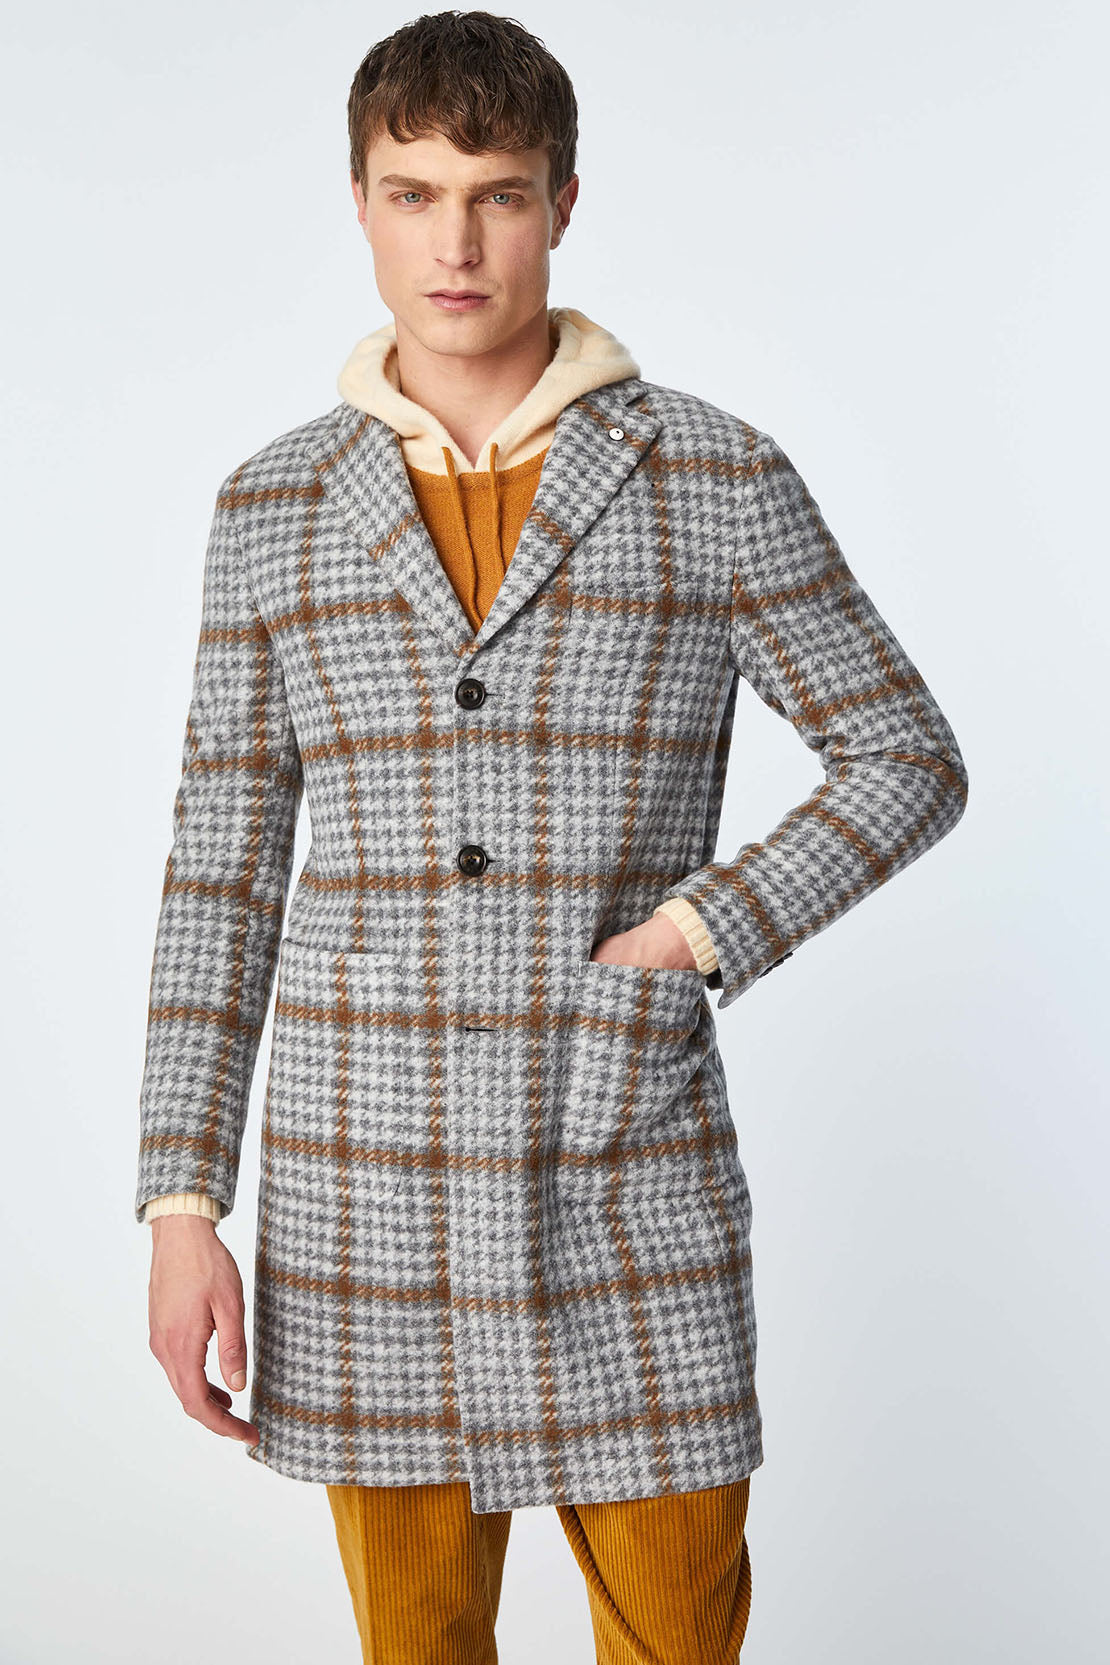 L.B.M 1911 - LONDON Soft Wool Blend Overcoat In Grey And Brown Check 35720/1 7451